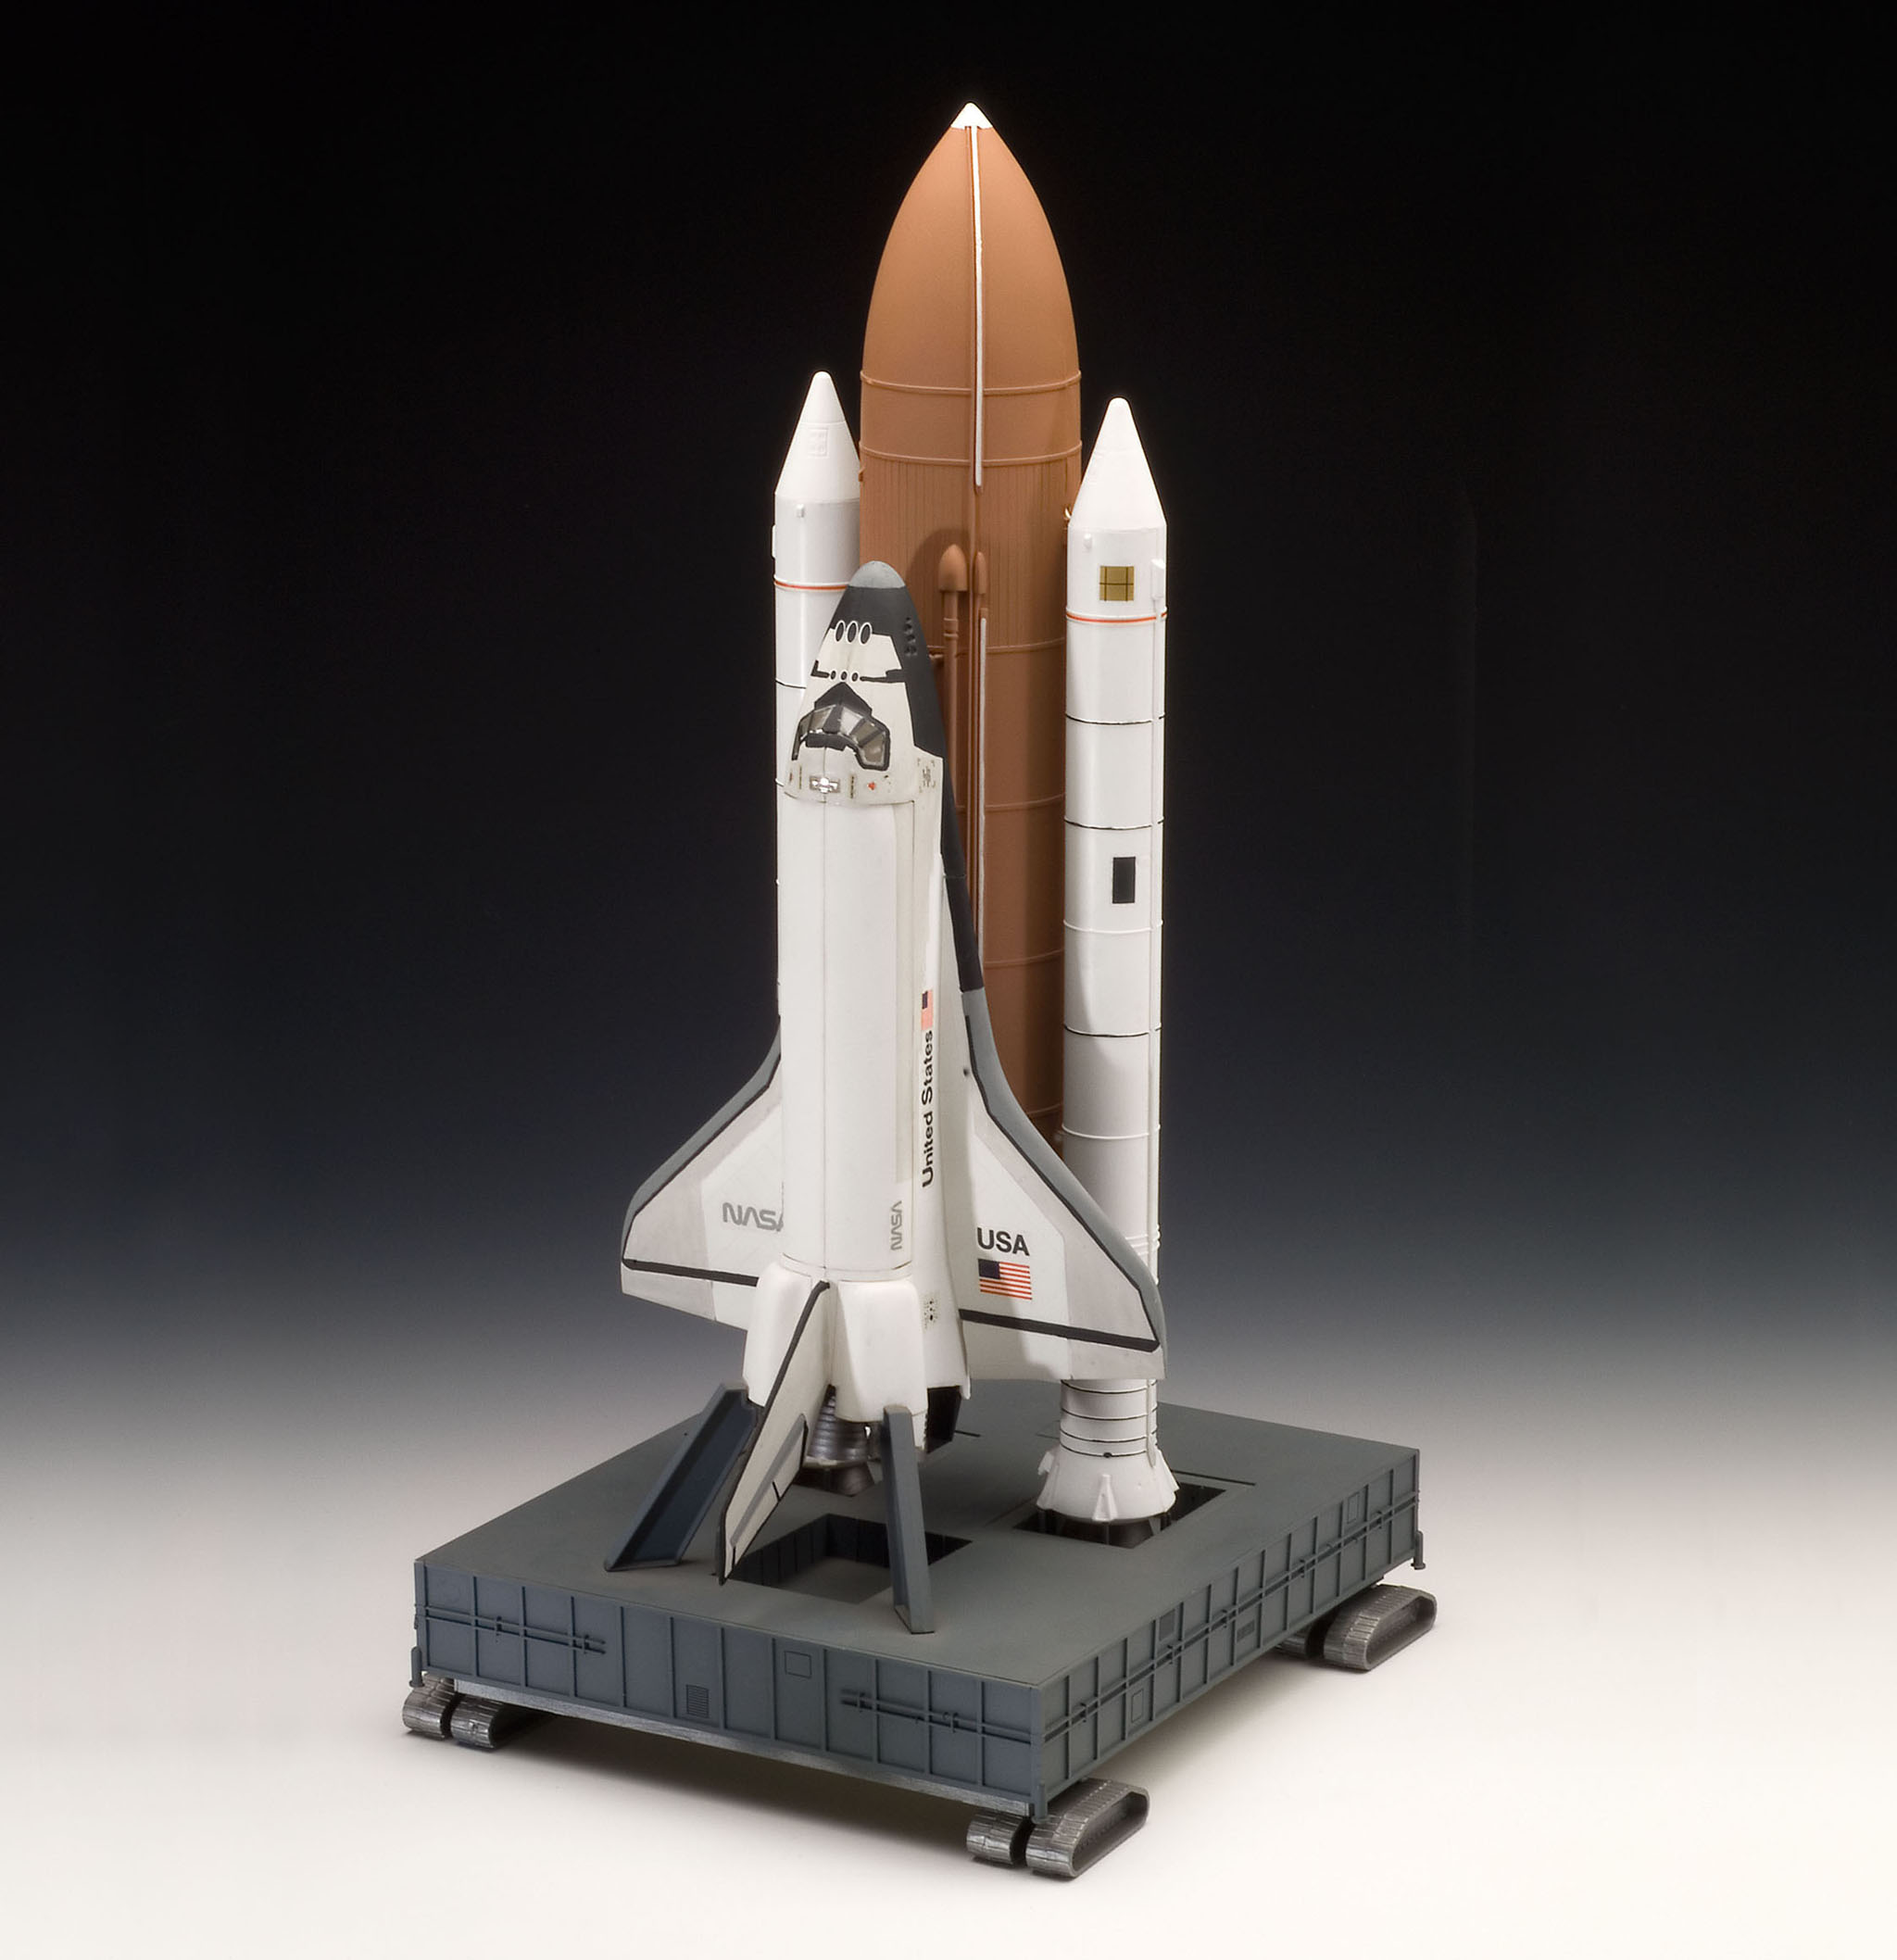 Space Shuttle Disc-B - Revell 1:144 Space Shuttle Discovery &Booster